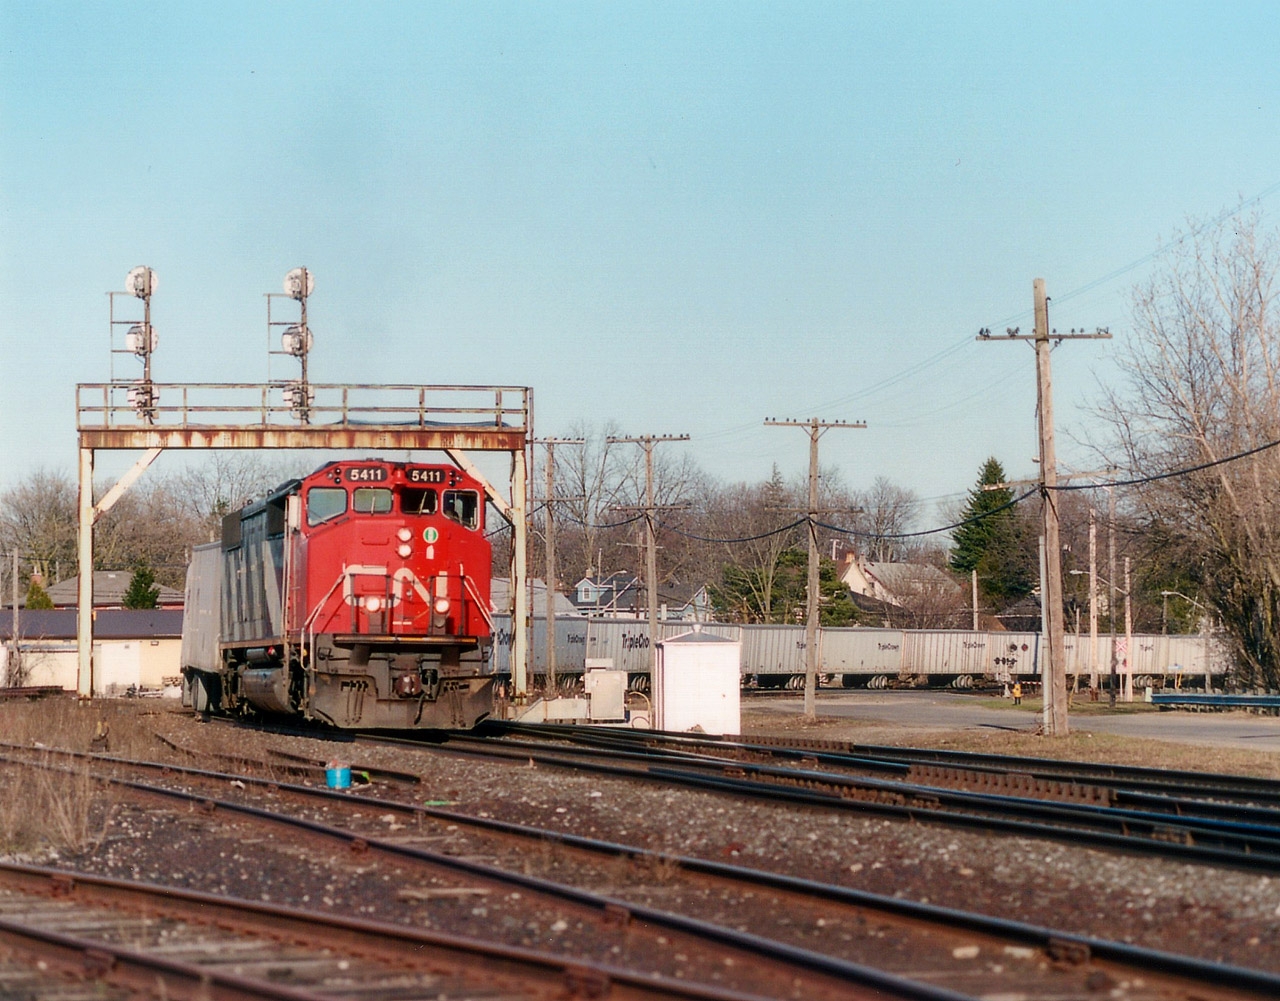 Another operation of the past in this area is the Triple Crown trailer train. Apparently it was no longer deemed an efficient operation. Here is the westbound Toronto to Detroit #145 as seen at Paris Jct behind CN 5411, an SD50F, NOT the 5411 seen these days, which is a newly acquired SD60. The locomotive featured in this image was retired within a couple of years and dealt off to the Dakota, Missouri Valley & Western, along with a handful of others of this series.